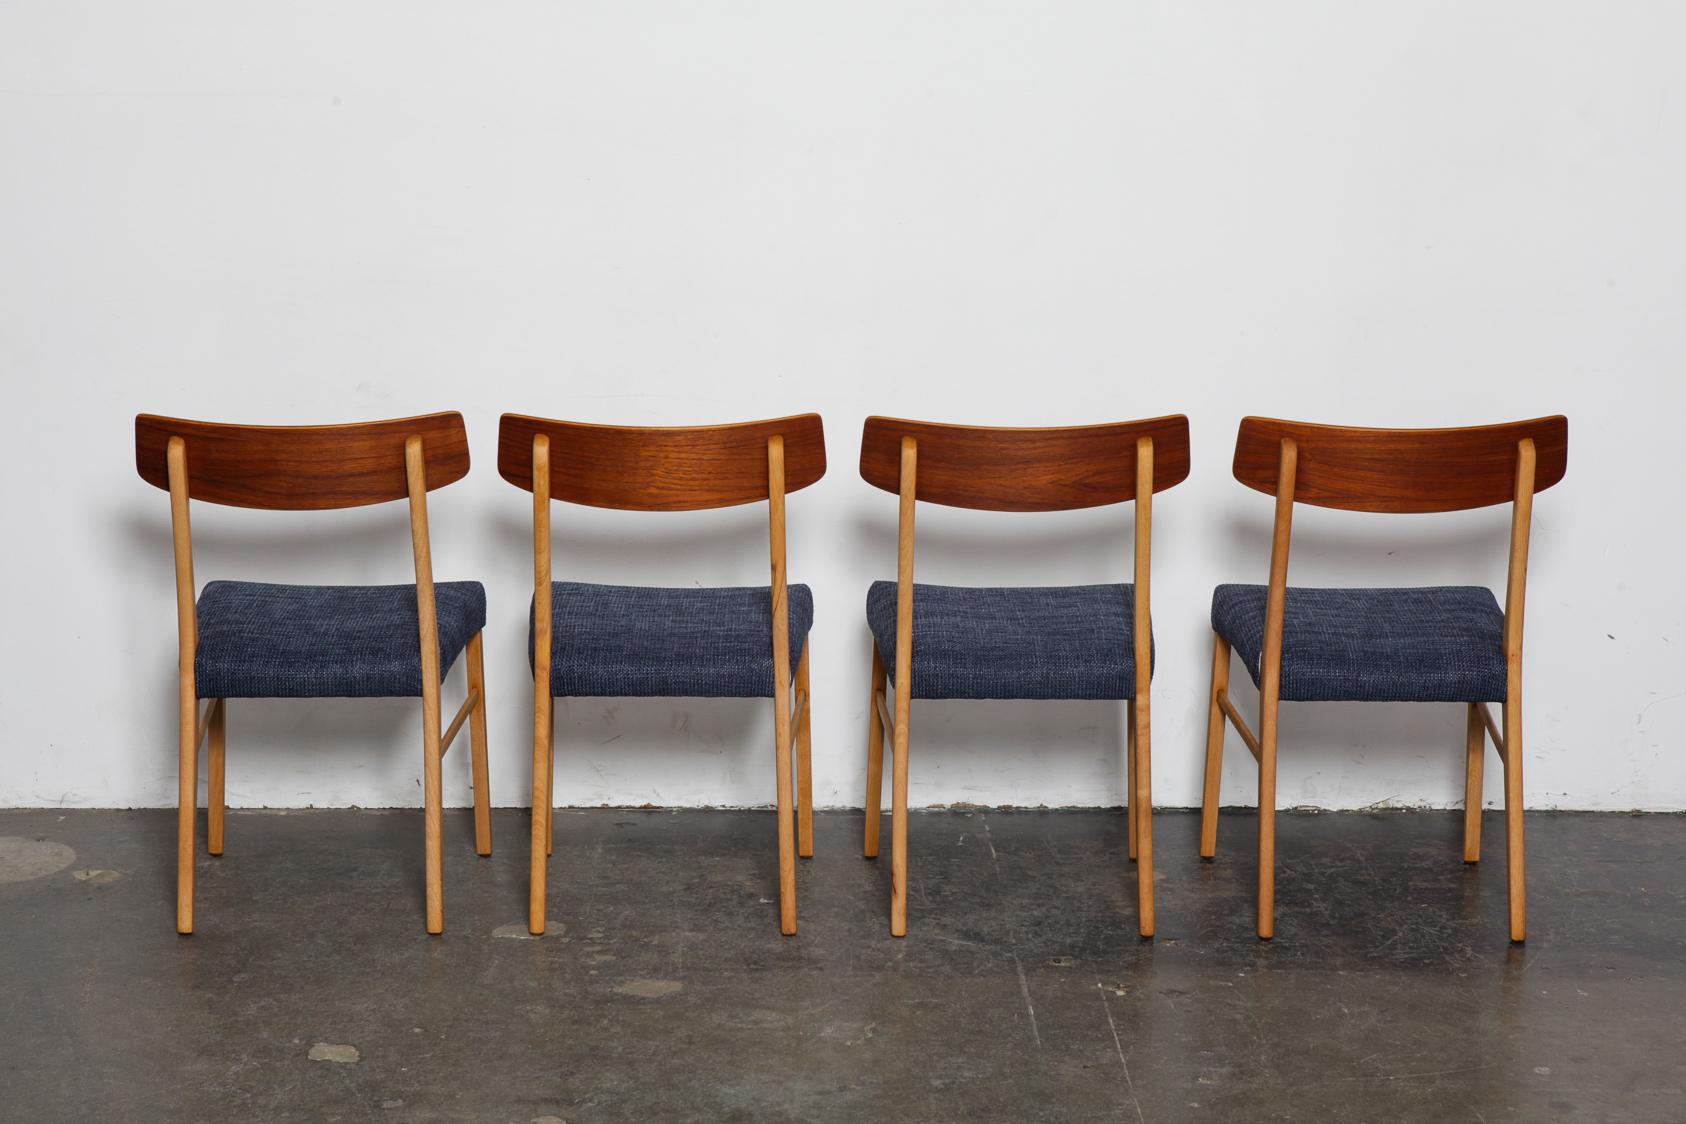 Set of 4 teak bent back Danish dining chairs by Farstrup with beech legs. Newly refinished in a natural teak oil and reupholstered in a navy woven fabric.